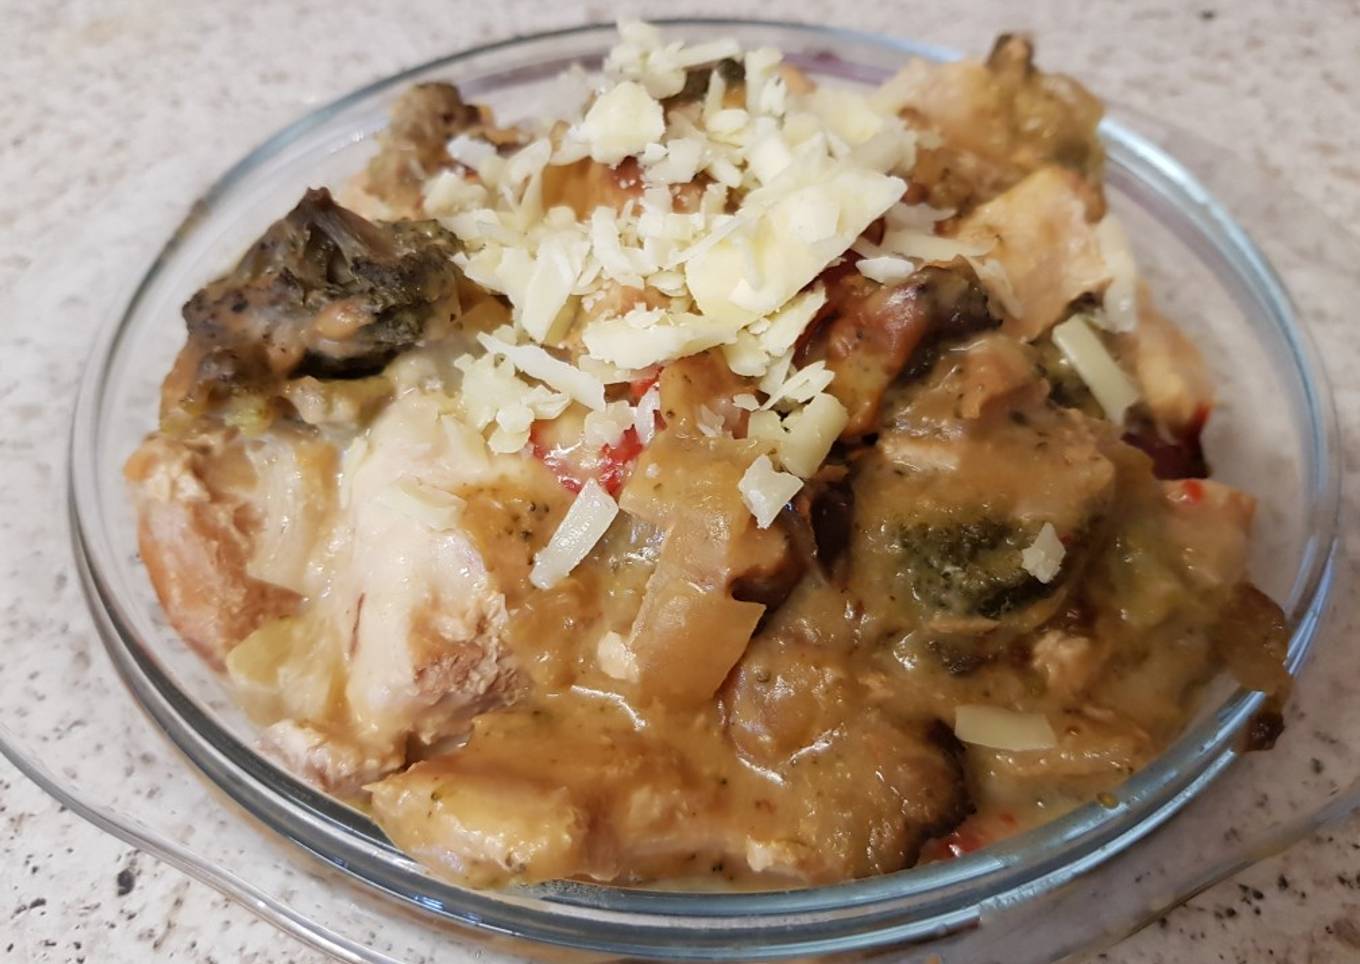 My Slow Cheesey Chicken and Broccoli bake